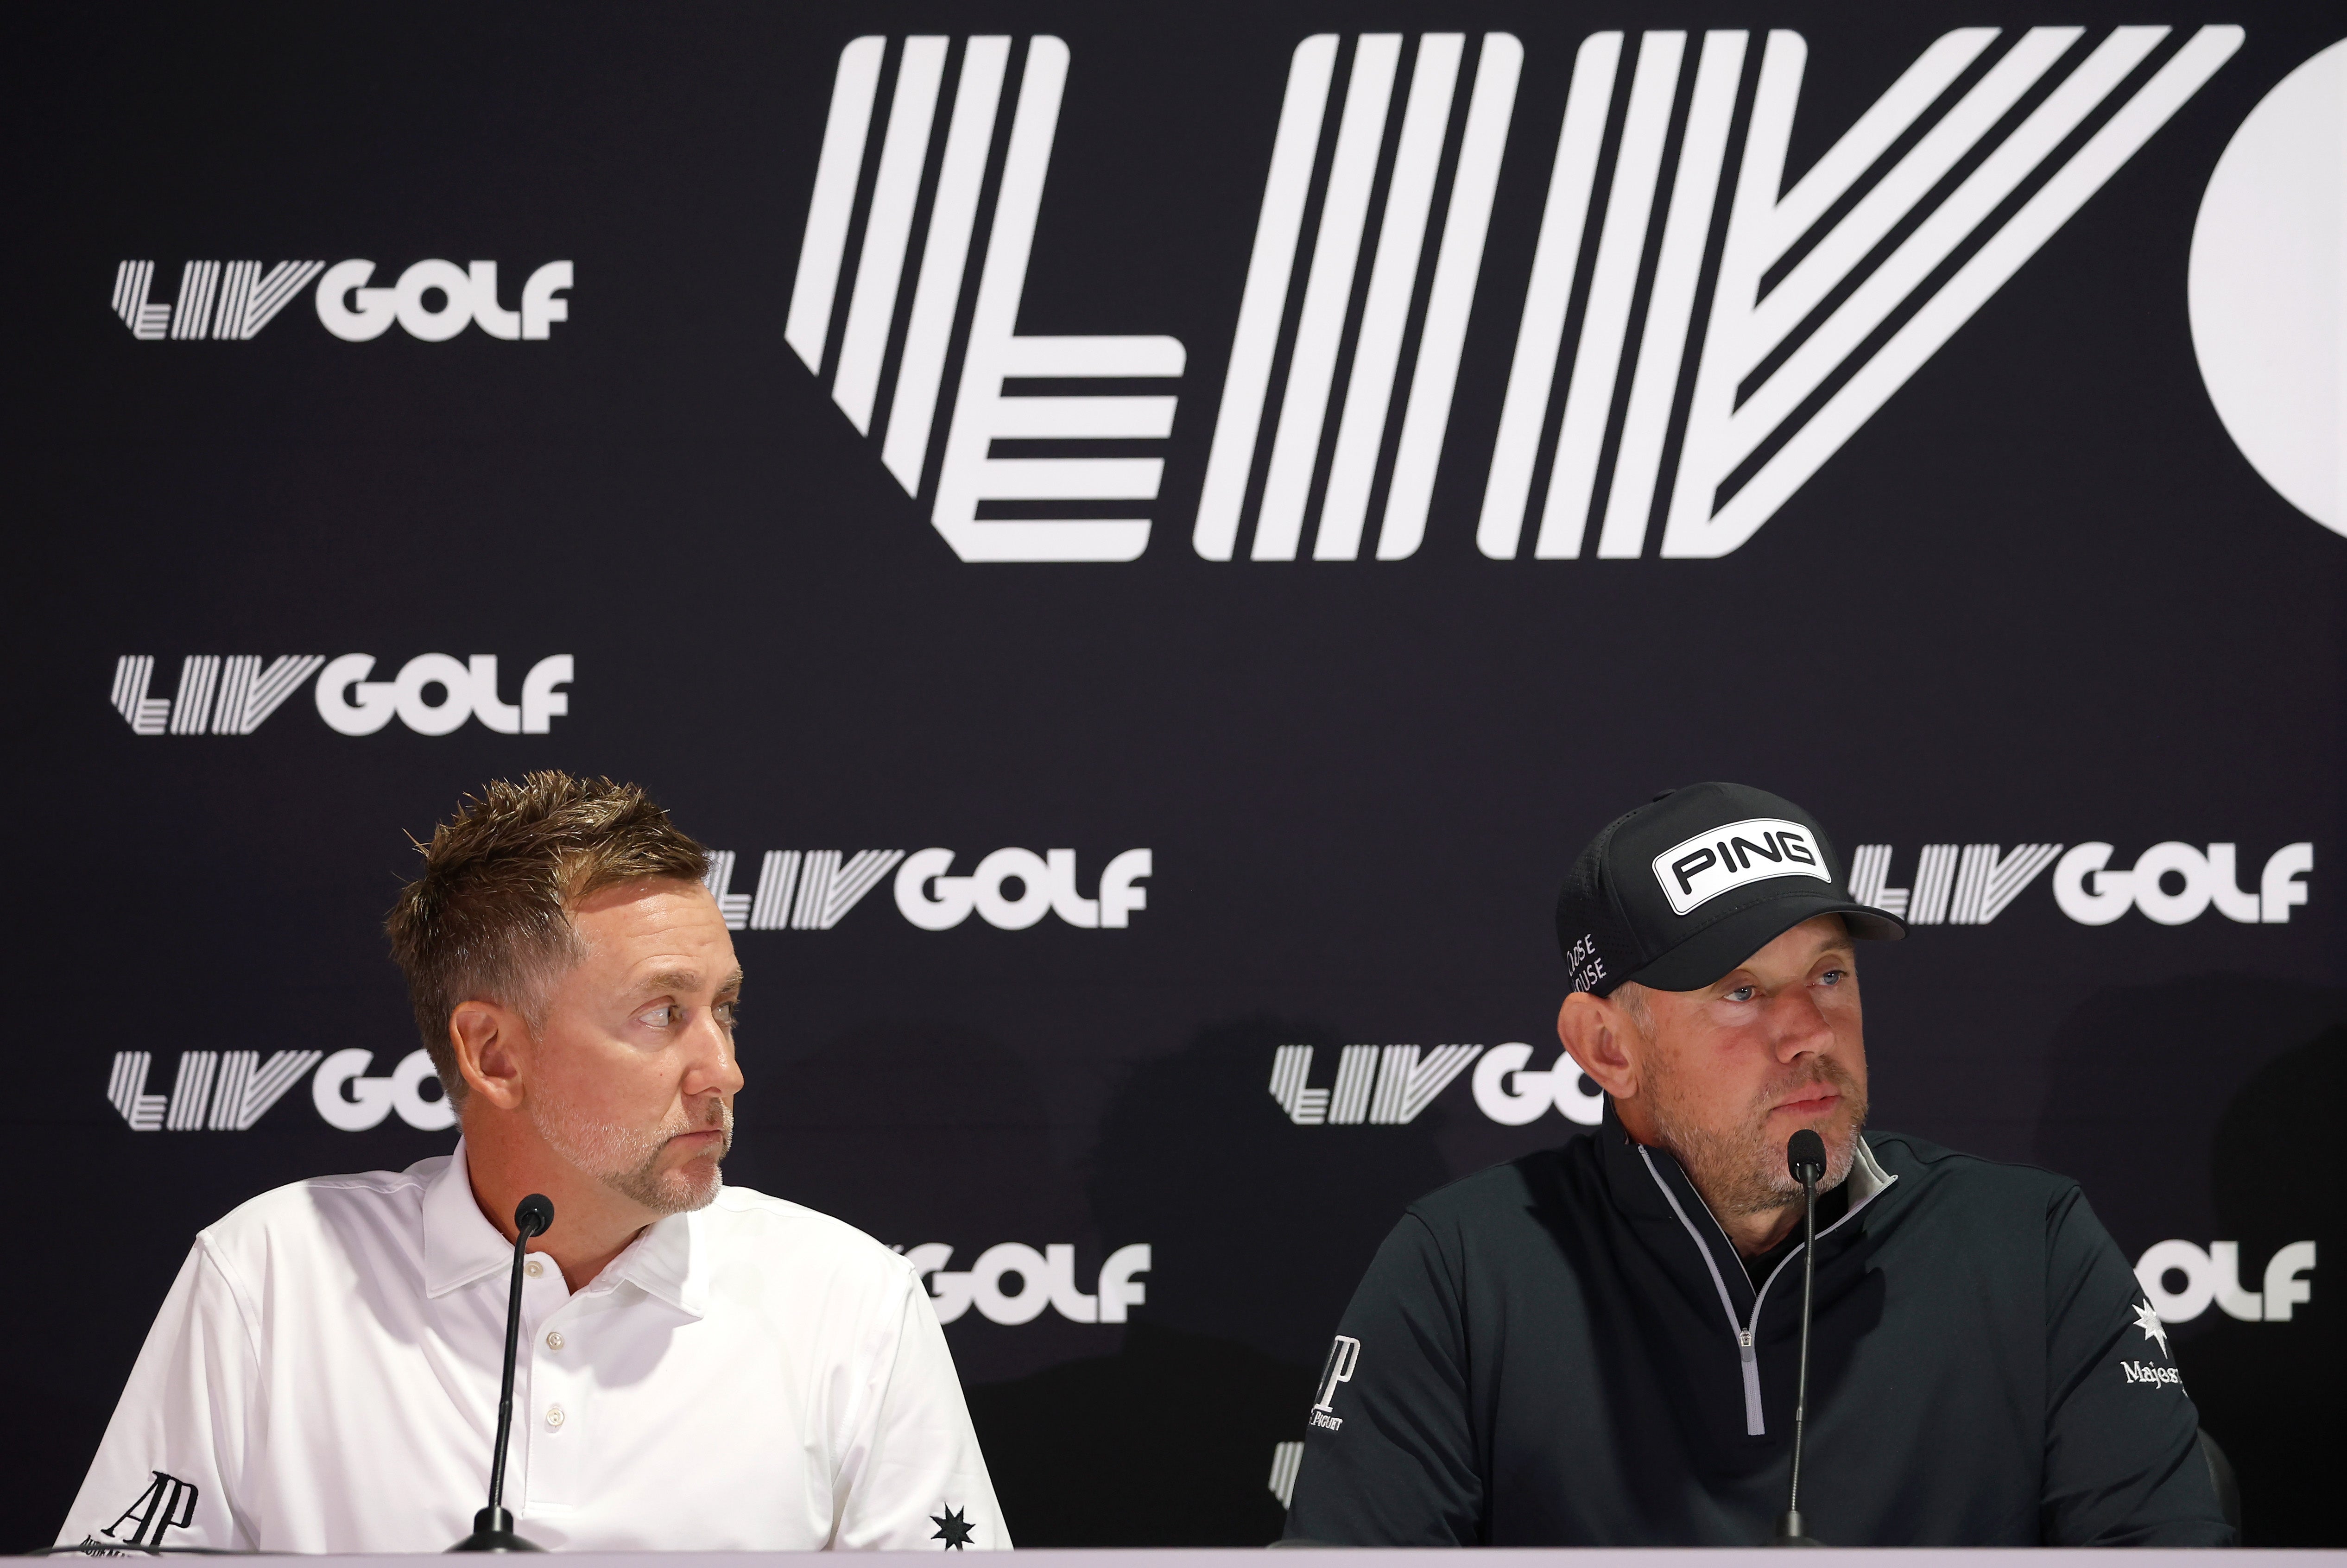 Westwood and Poulter’s move to LIV Golf has sparked plenty of controversy